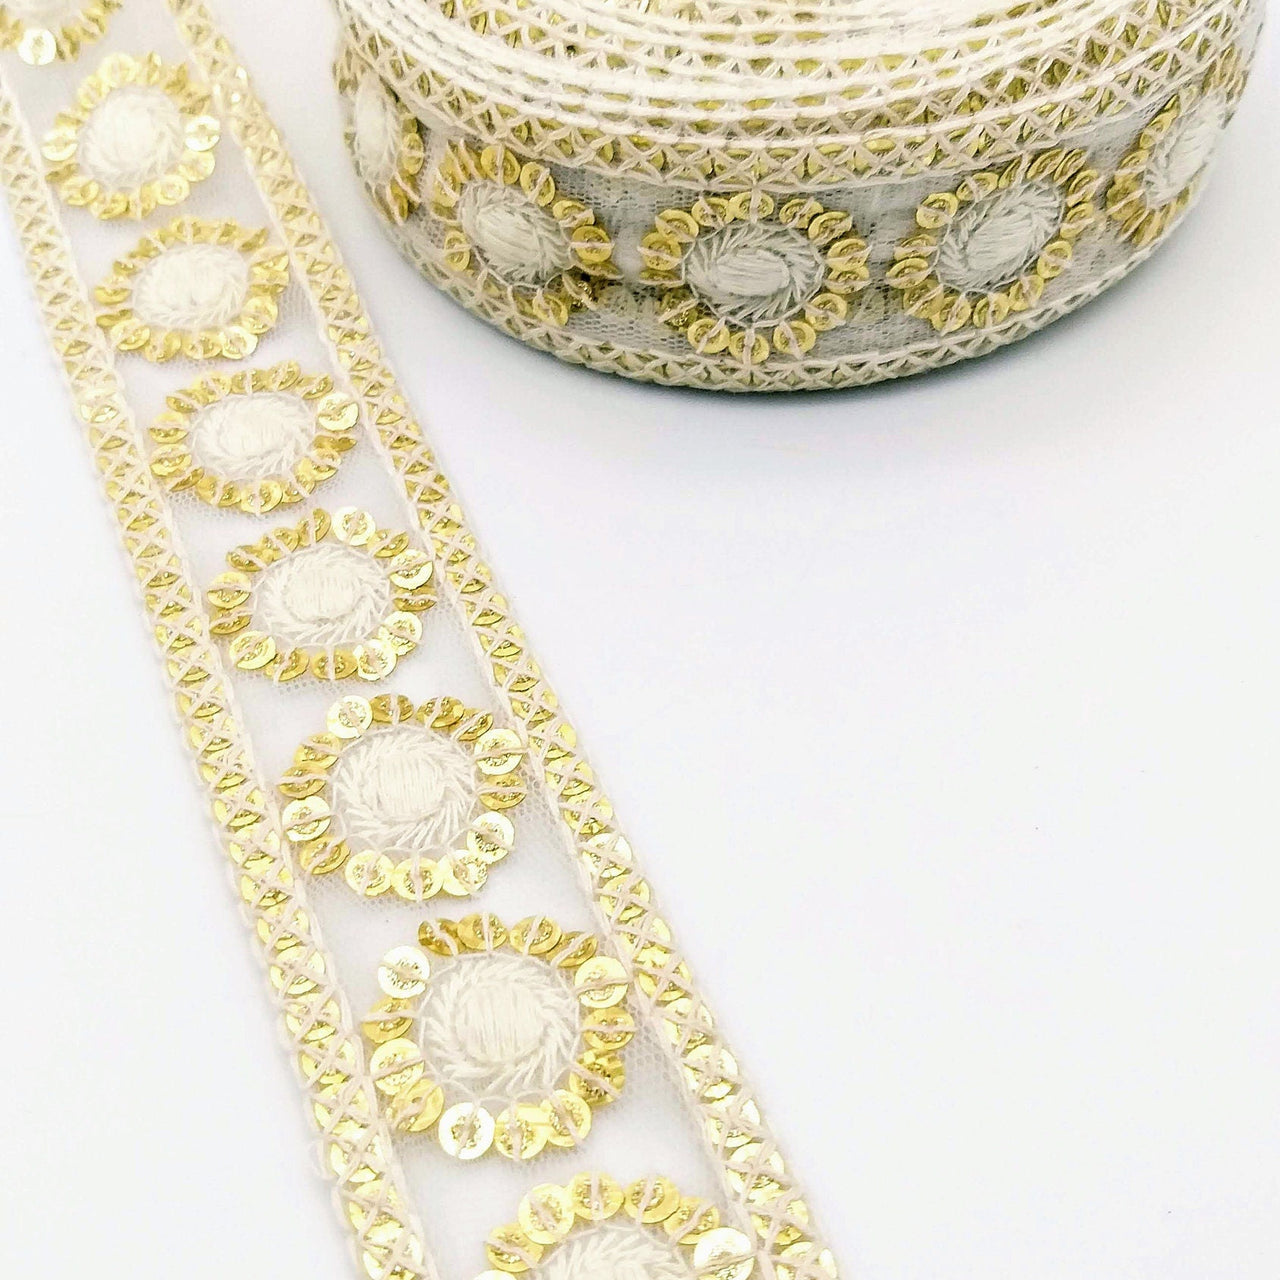 Nine Yards White Net Lace Trim Floral Embroidered With Gold Sequins, Sequinned Trim, Wedding Trim Bridal Trim